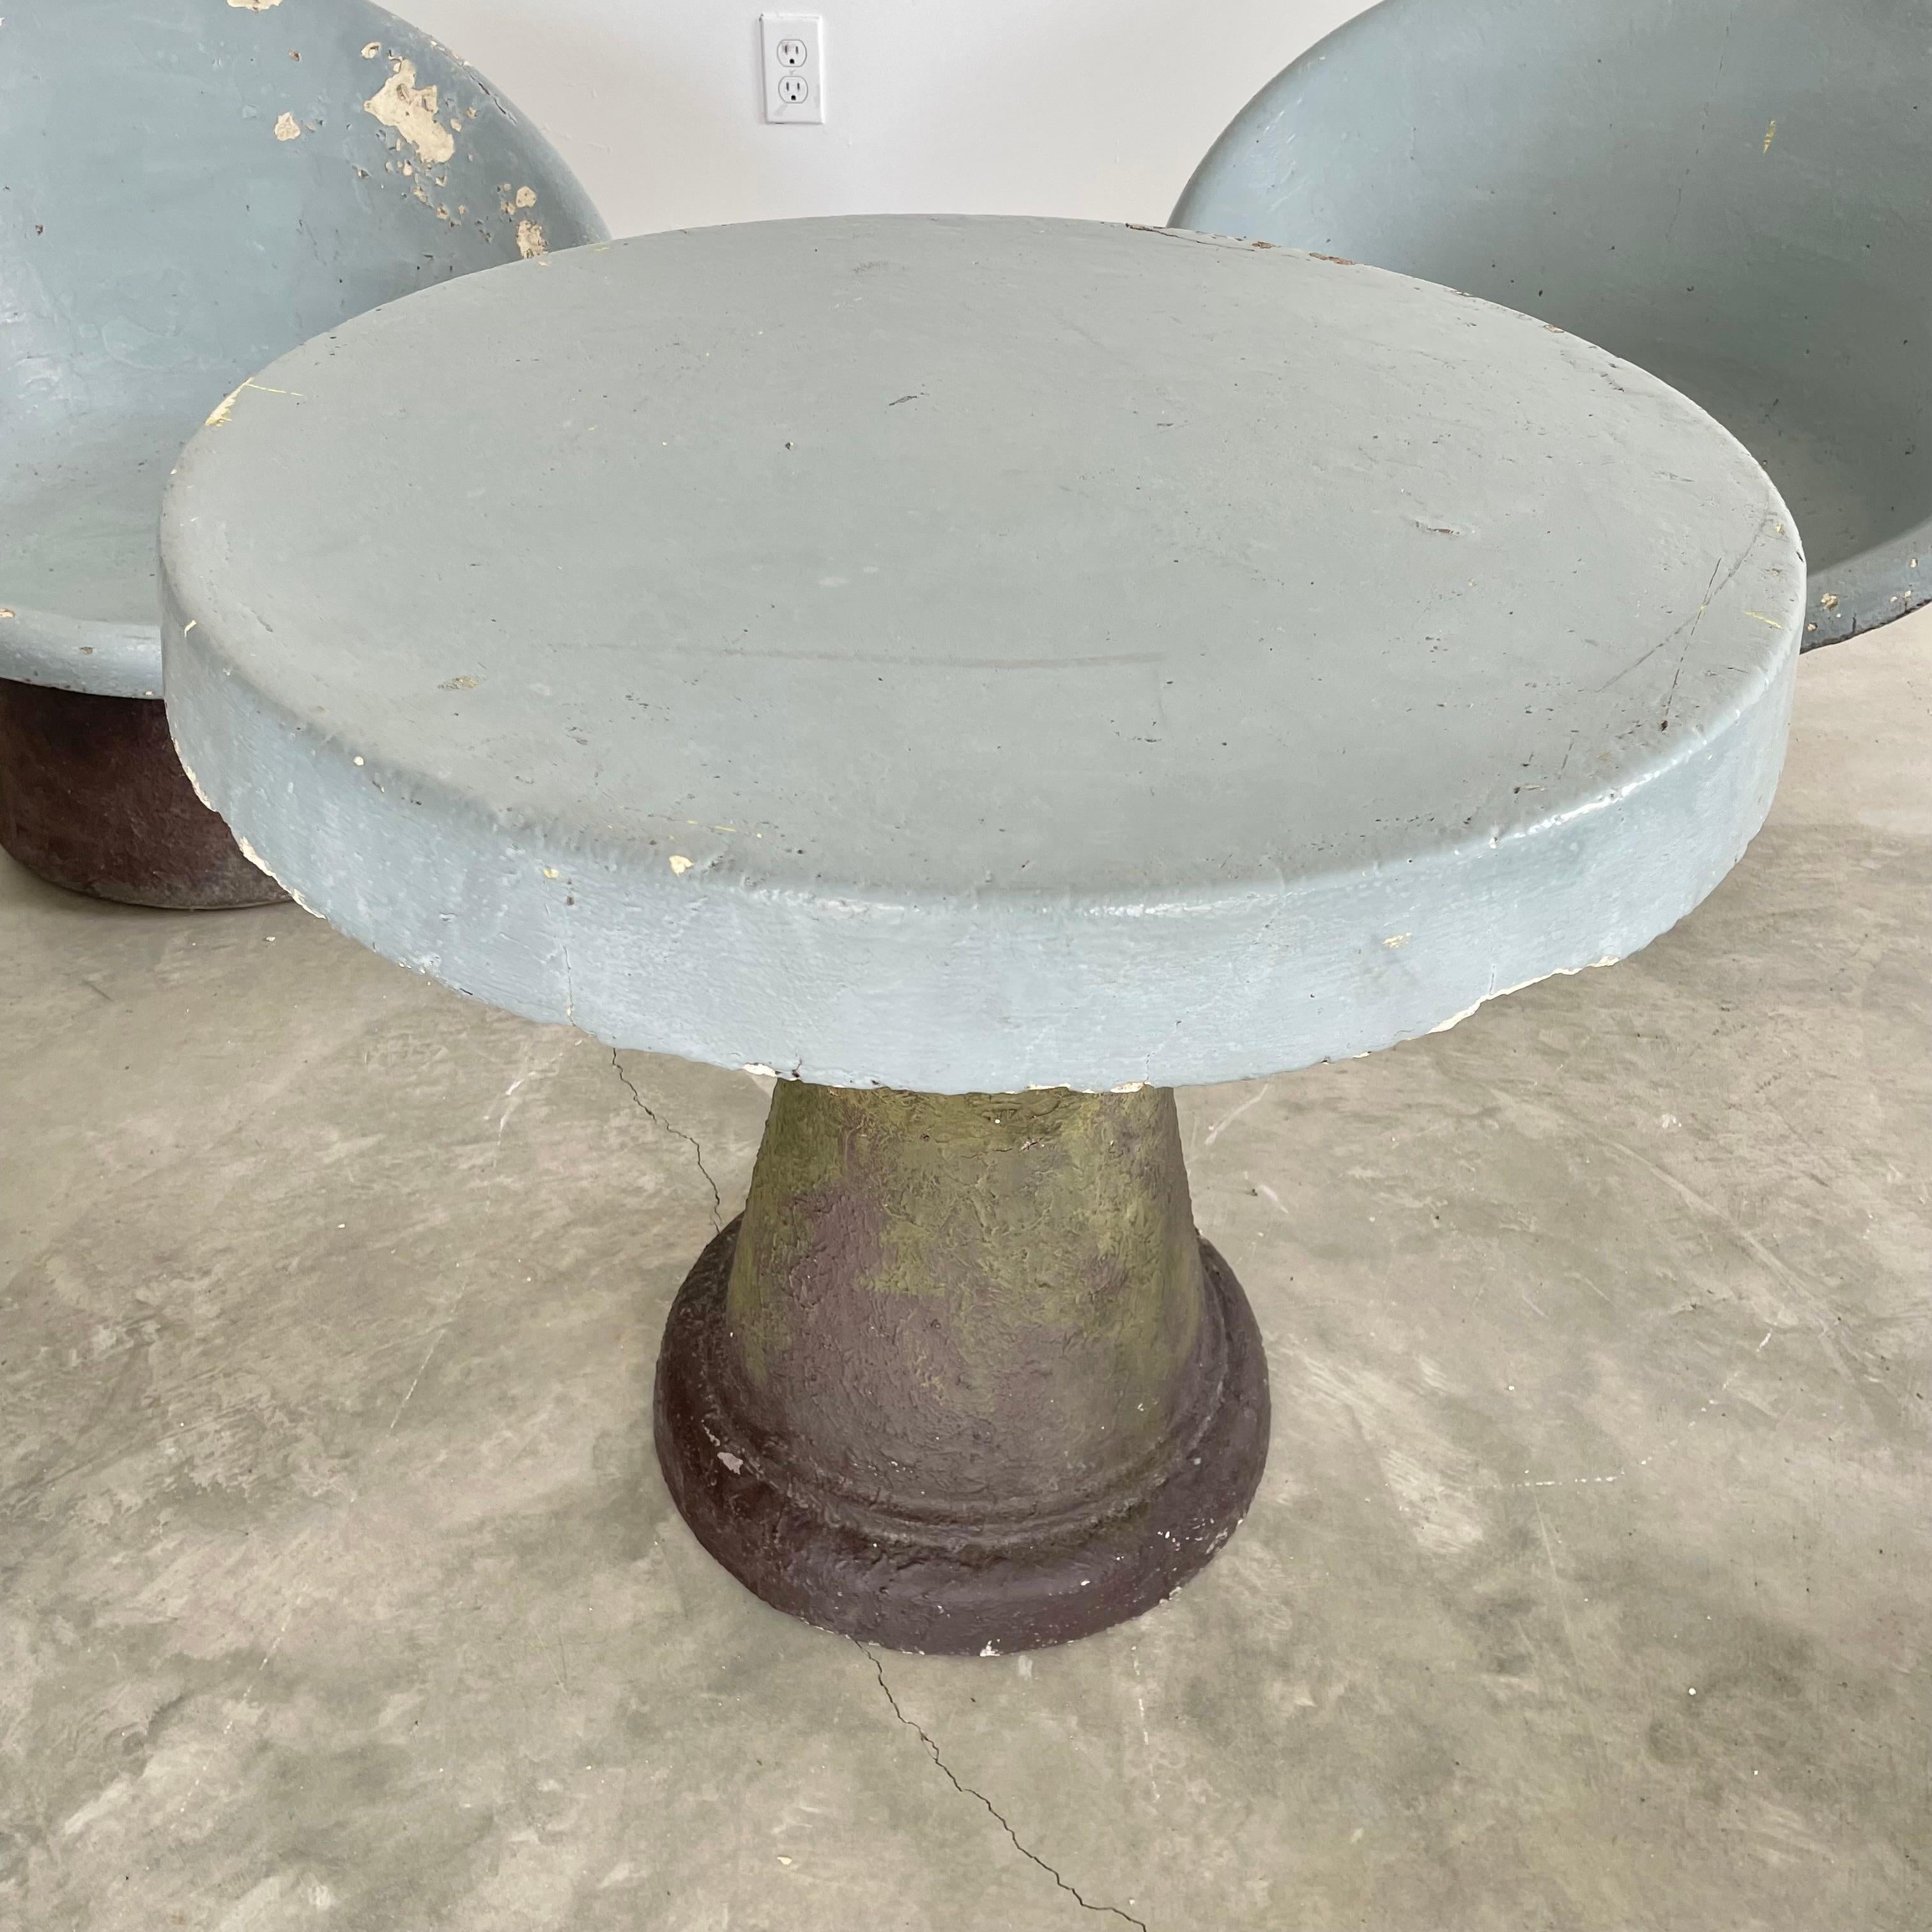 Sculptural Concrete Chairs and Table, 1960s, Switzerland For Sale 4